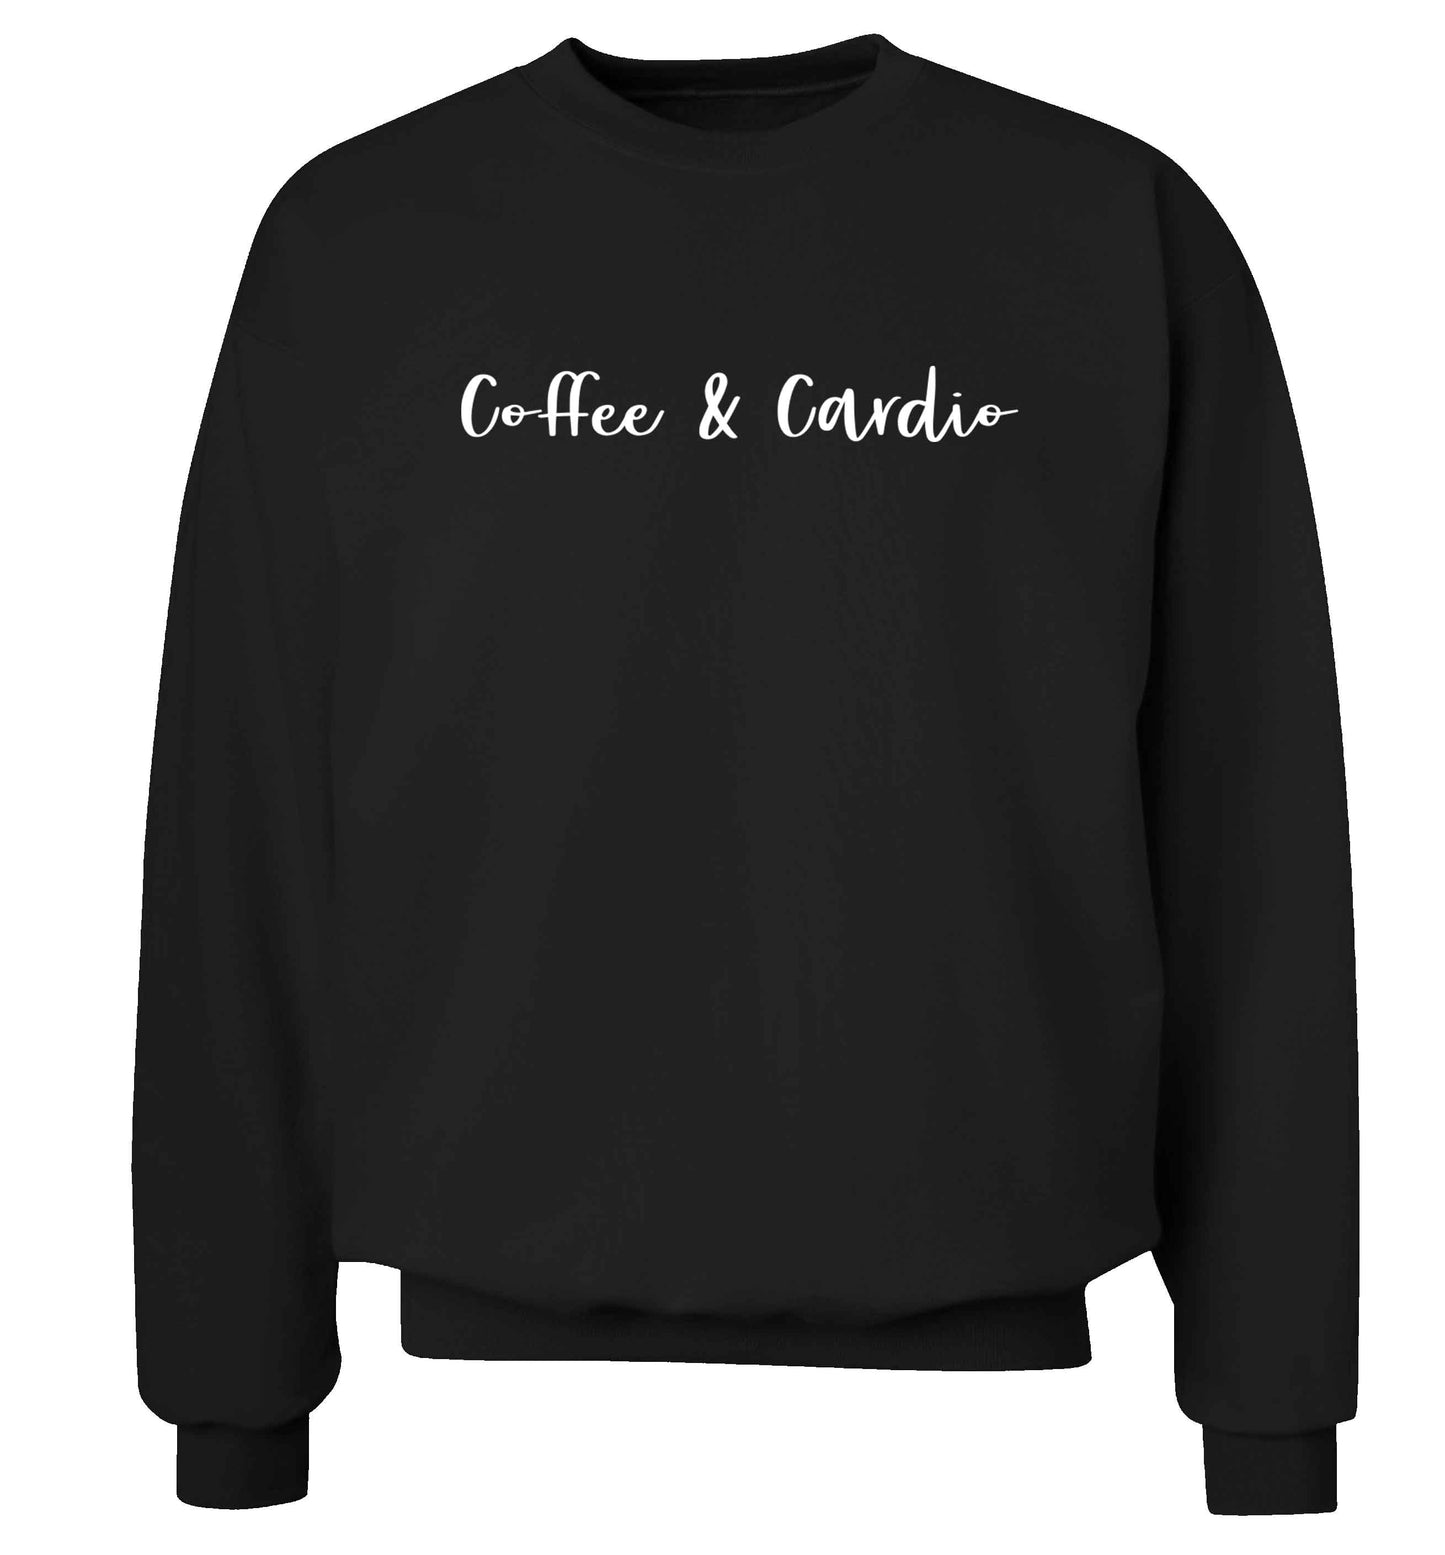 Coffee and cardio Adult's unisex black Sweater 2XL